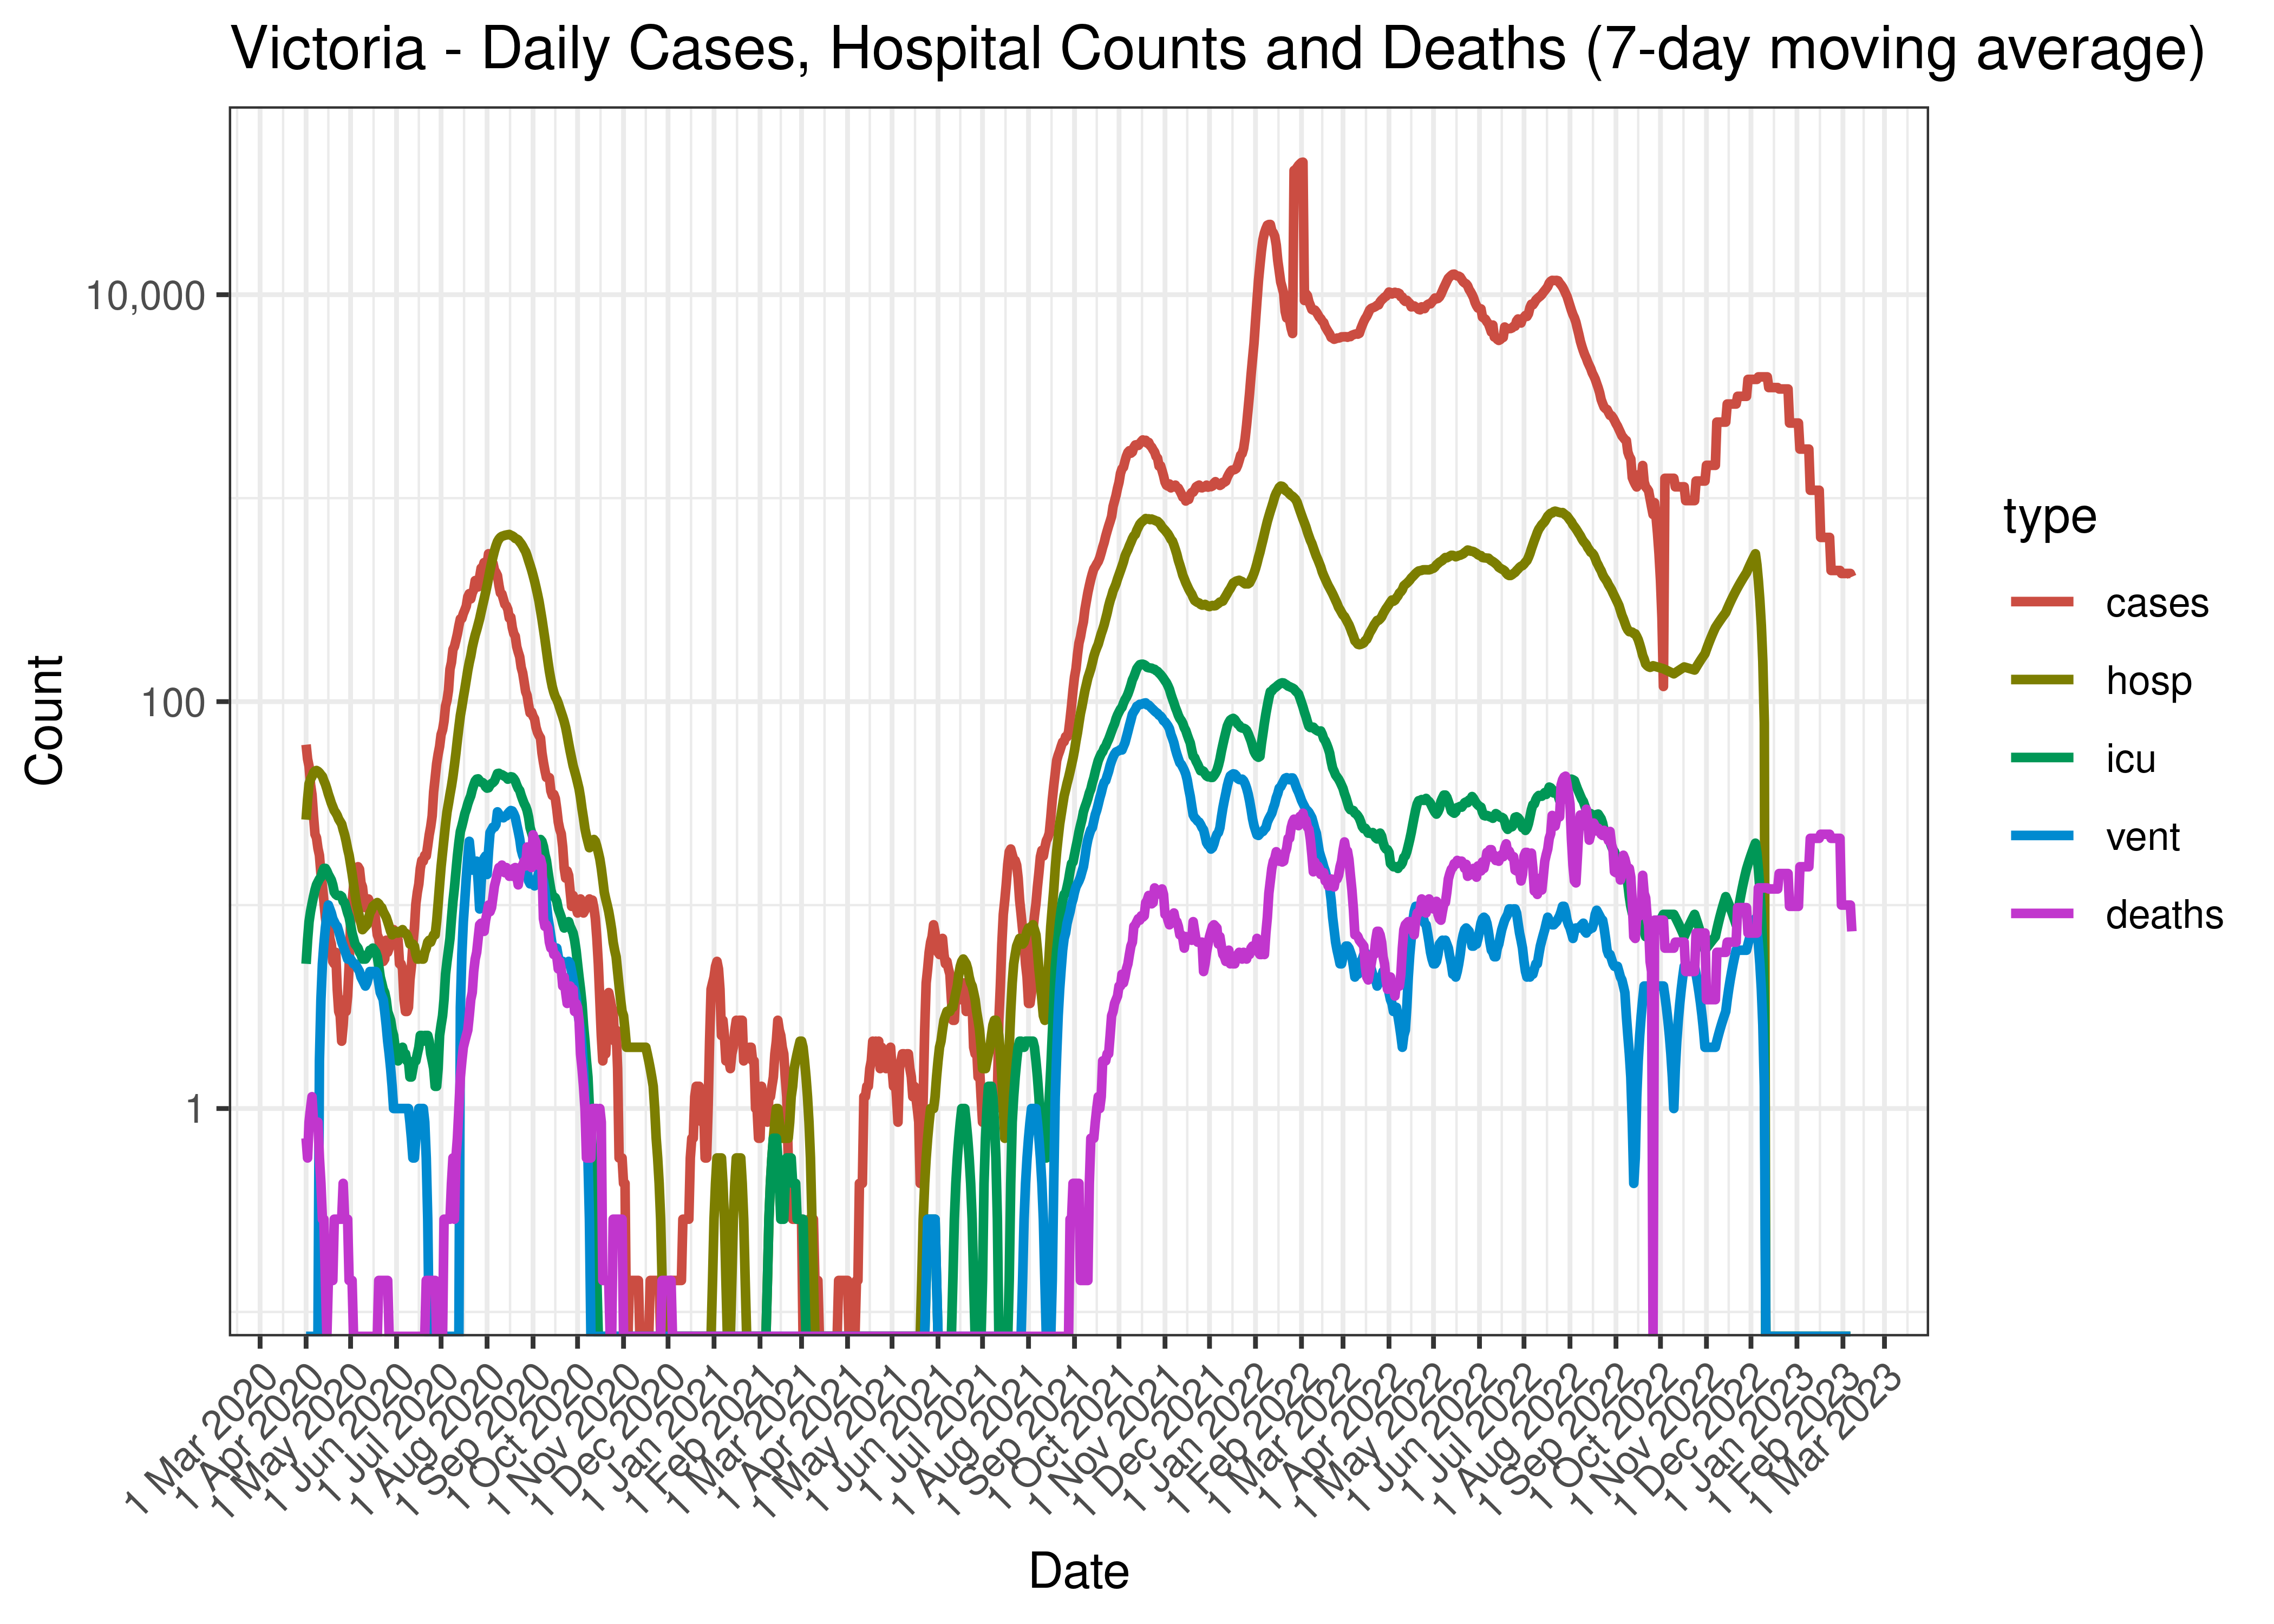 Victoria - Daily Cases (7-day moving average)